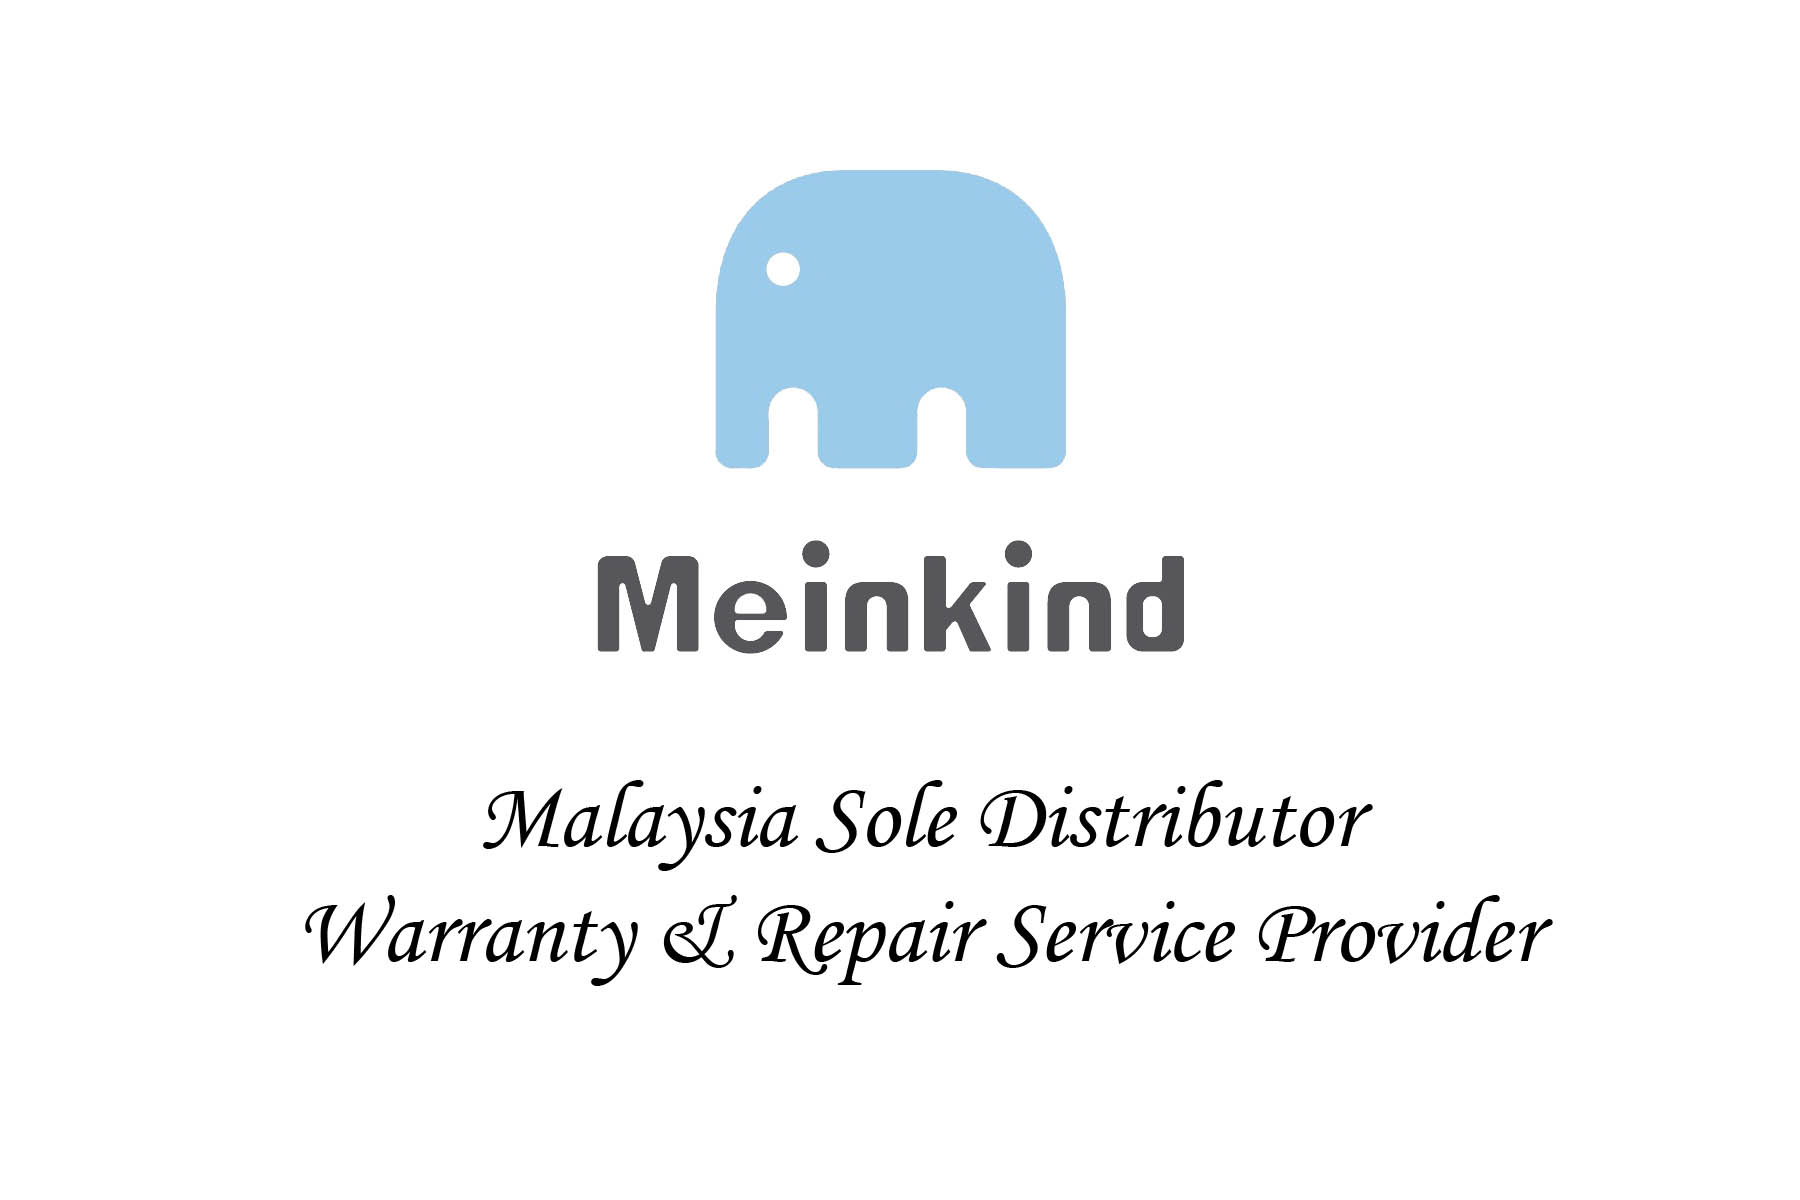 Malaysia Sole Distributor for Meinkind